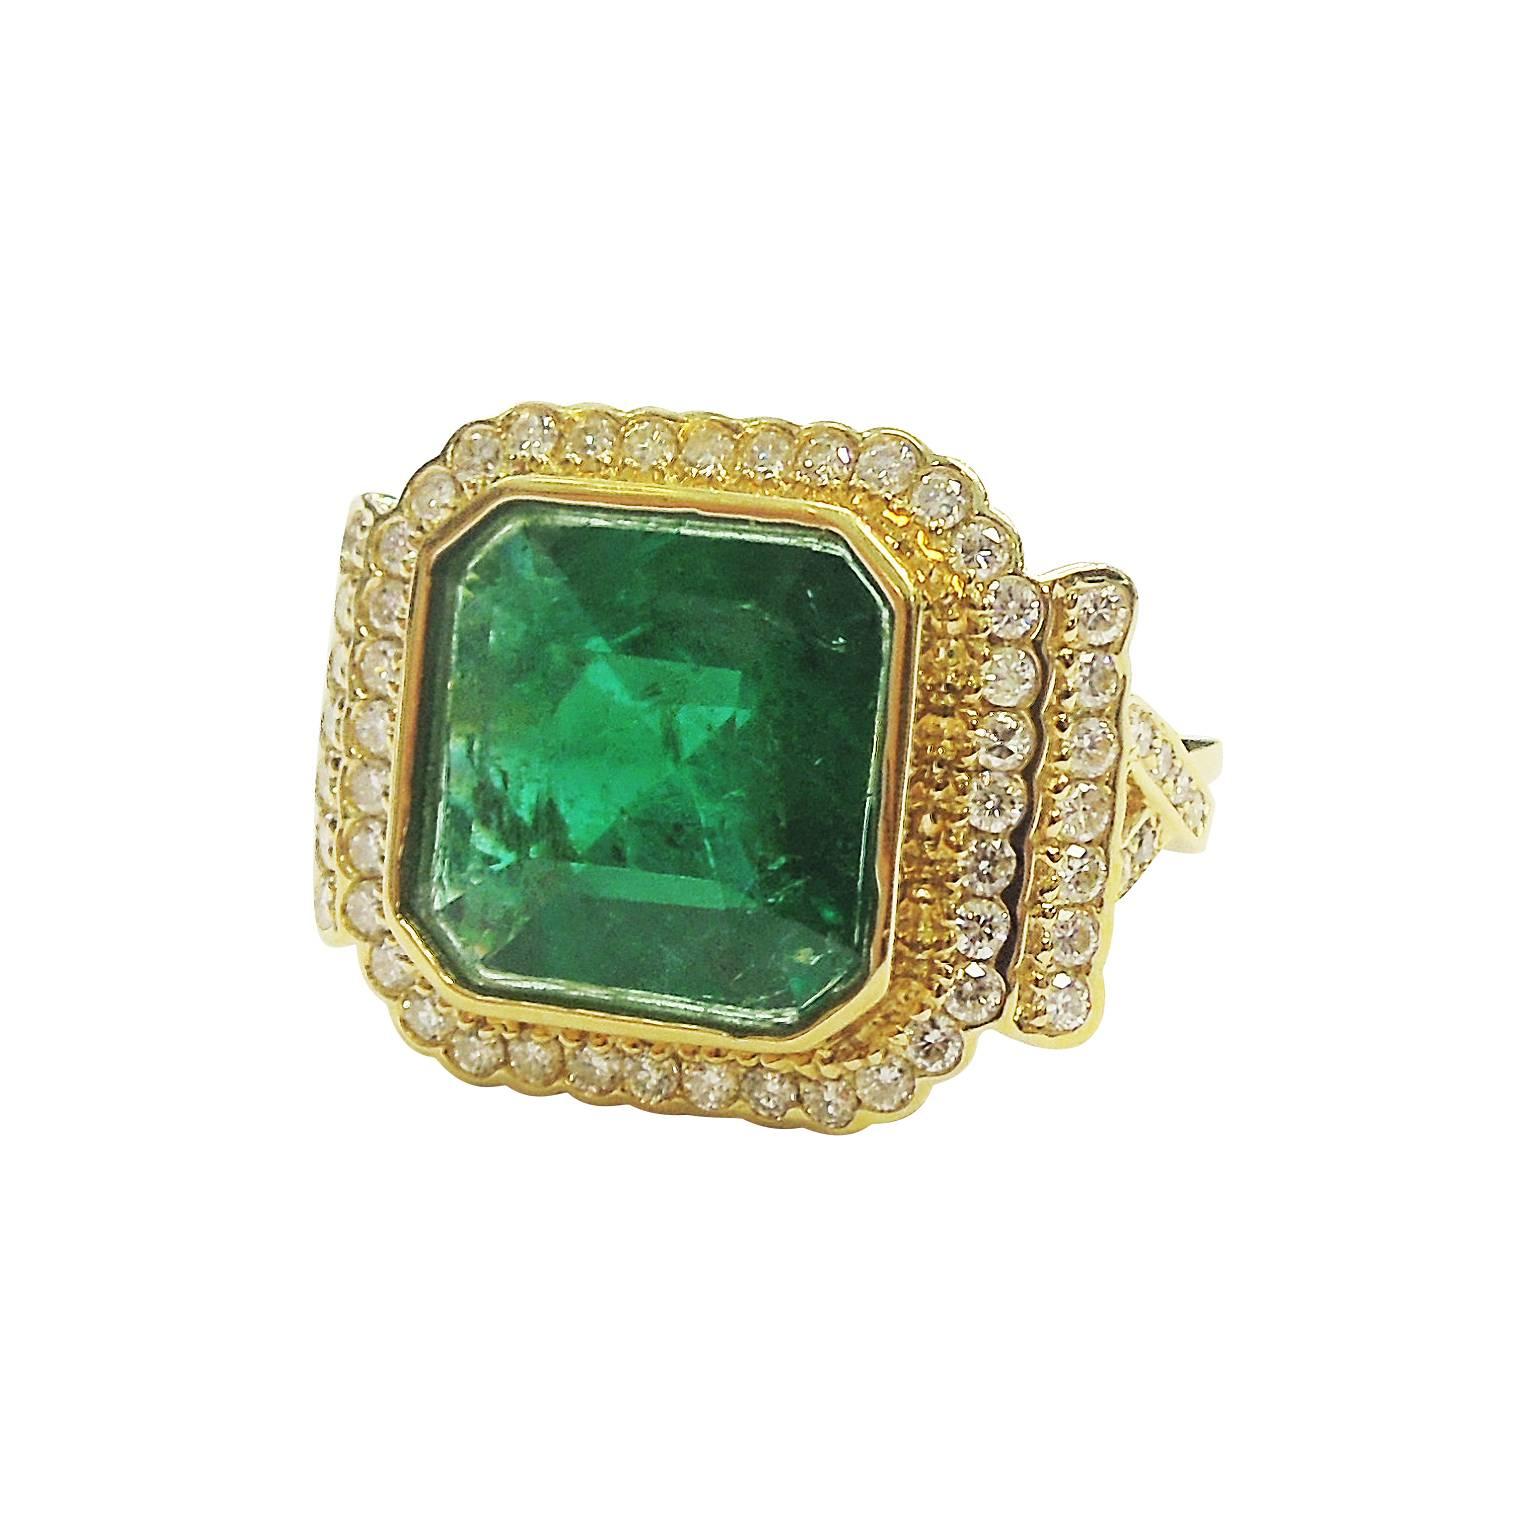 18K Yellow Gold Ring with Diamonds and Emerald Center

Center Emerald, 5.20ct. 

0.76ct. Diamonds throughout ring

Currently size 7.25. Can be sized.

Made in USA